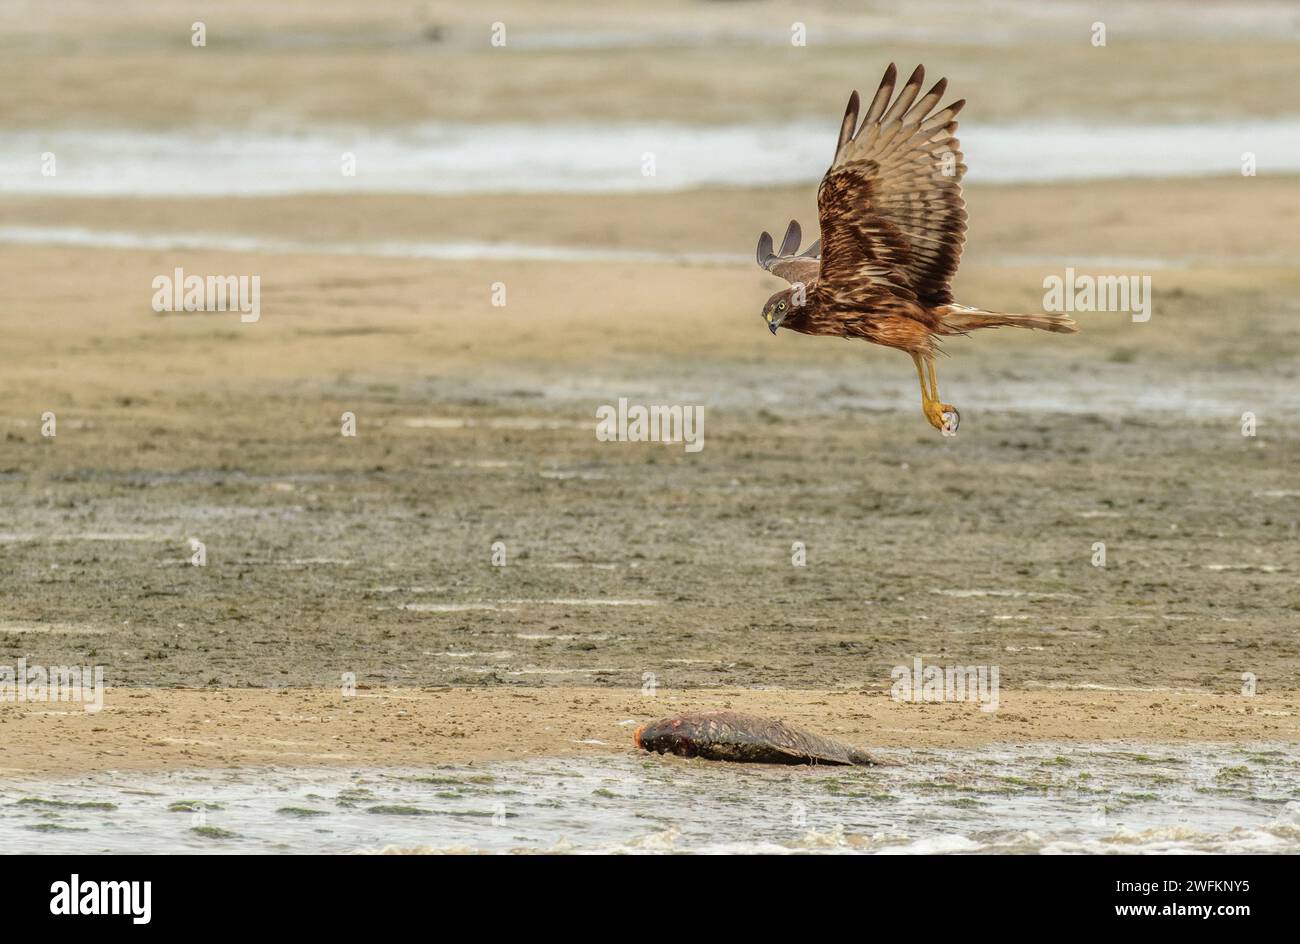 Swamp harrier, Circus approximans, coming in to land to feed on dead carp, Coorong lagoon, South Australia. Stock Photo